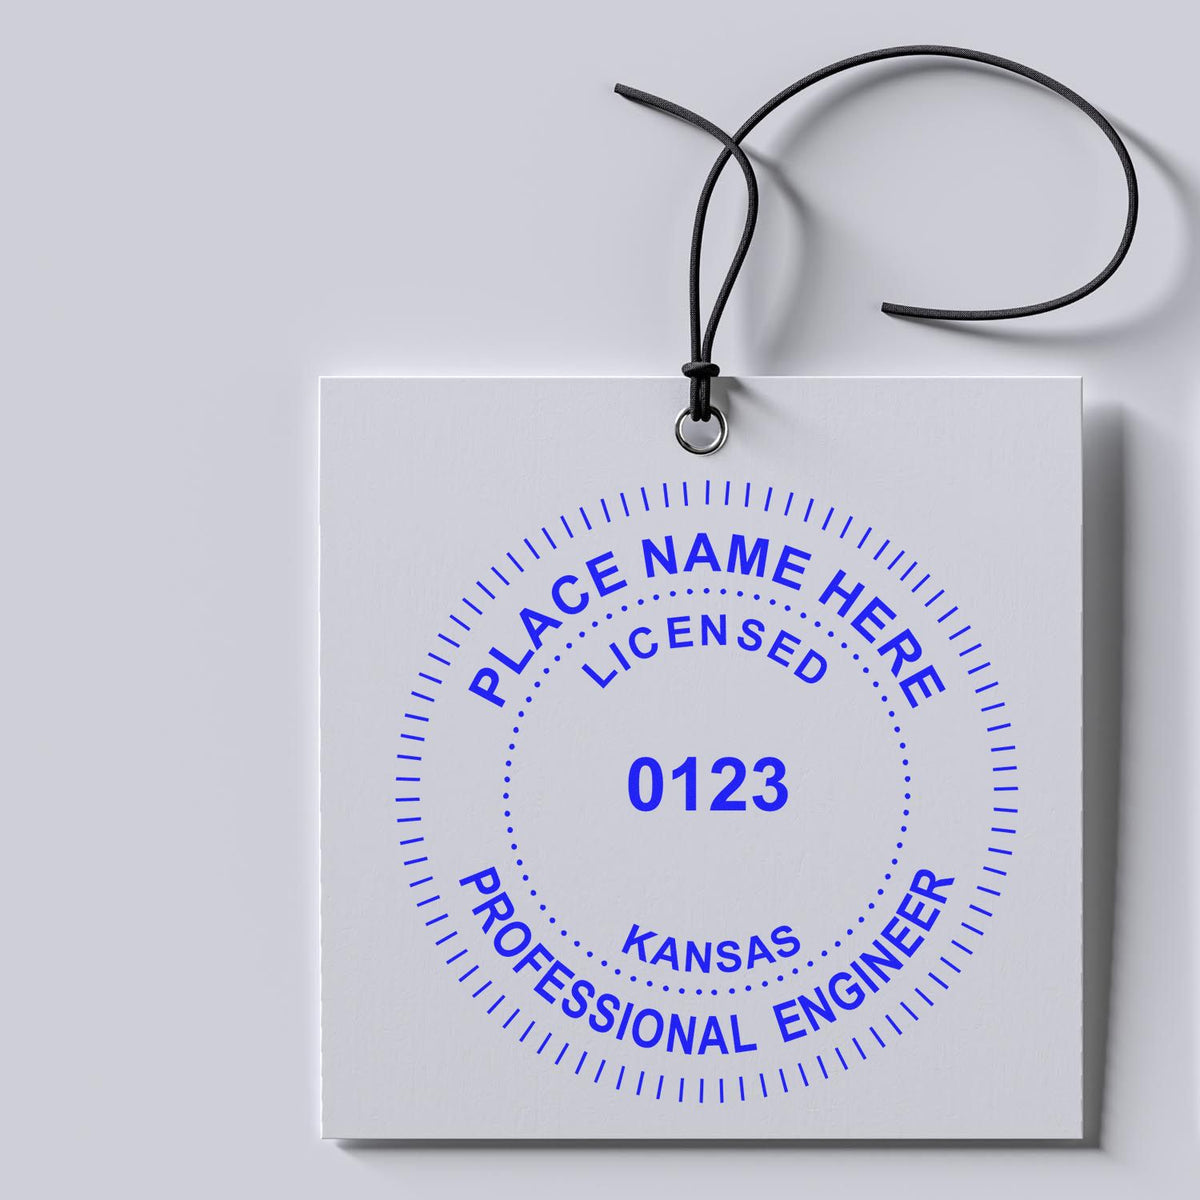 The Self-Inking Kansas PE Stamp stamp impression comes to life with a crisp, detailed photo on paper - showcasing true professional quality.